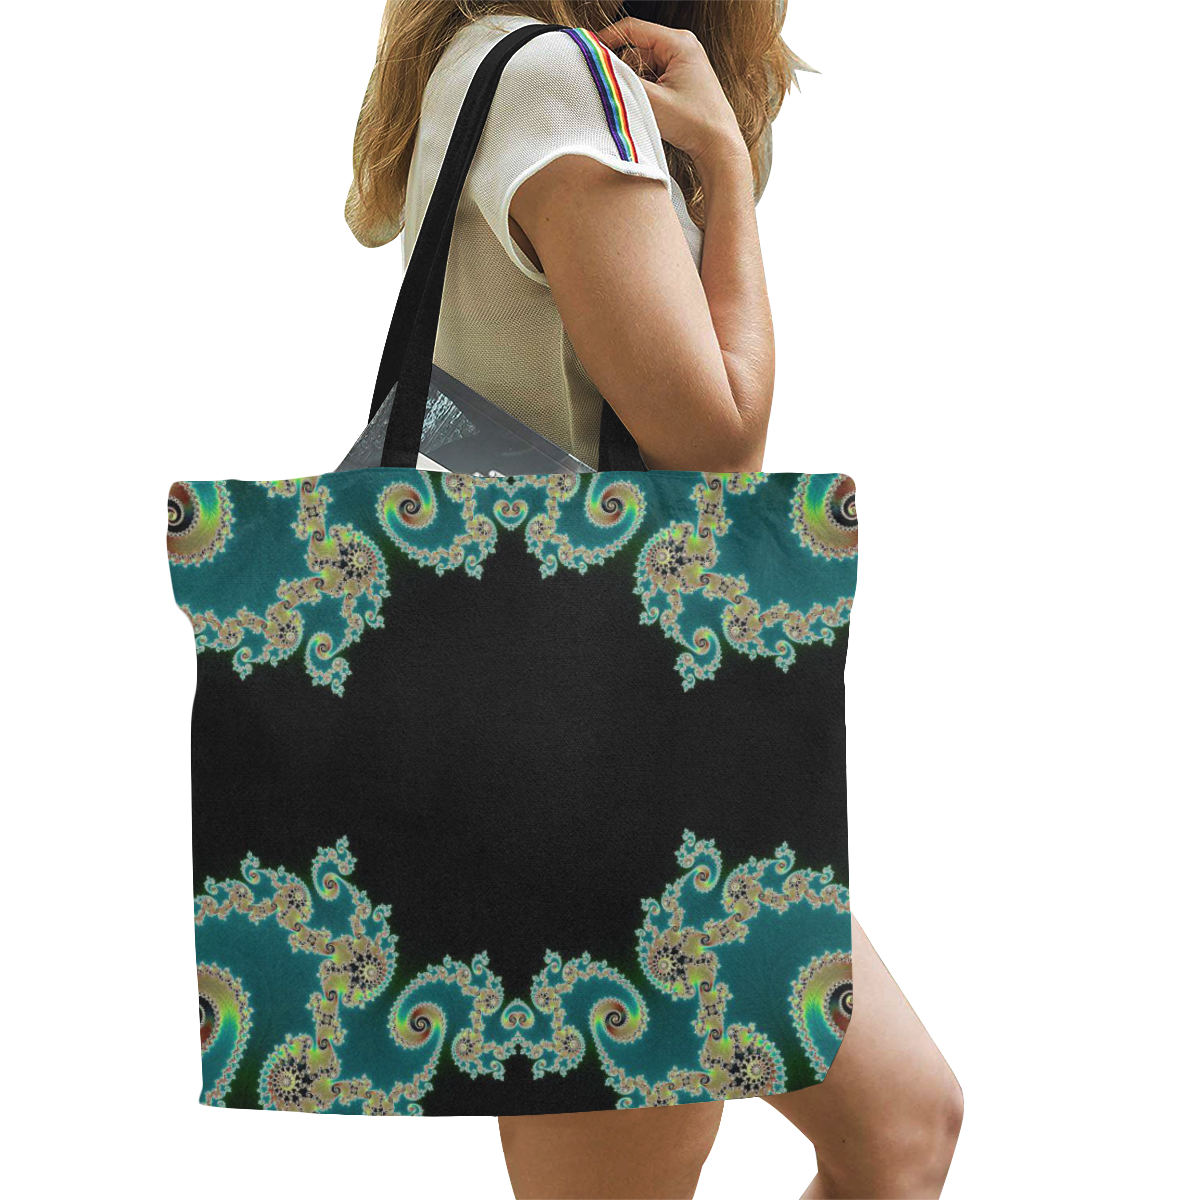 Aqua and Black  Hearts Lace Fractal Abstract All Over Print Canvas Tote Bag/Large (Model 1699)